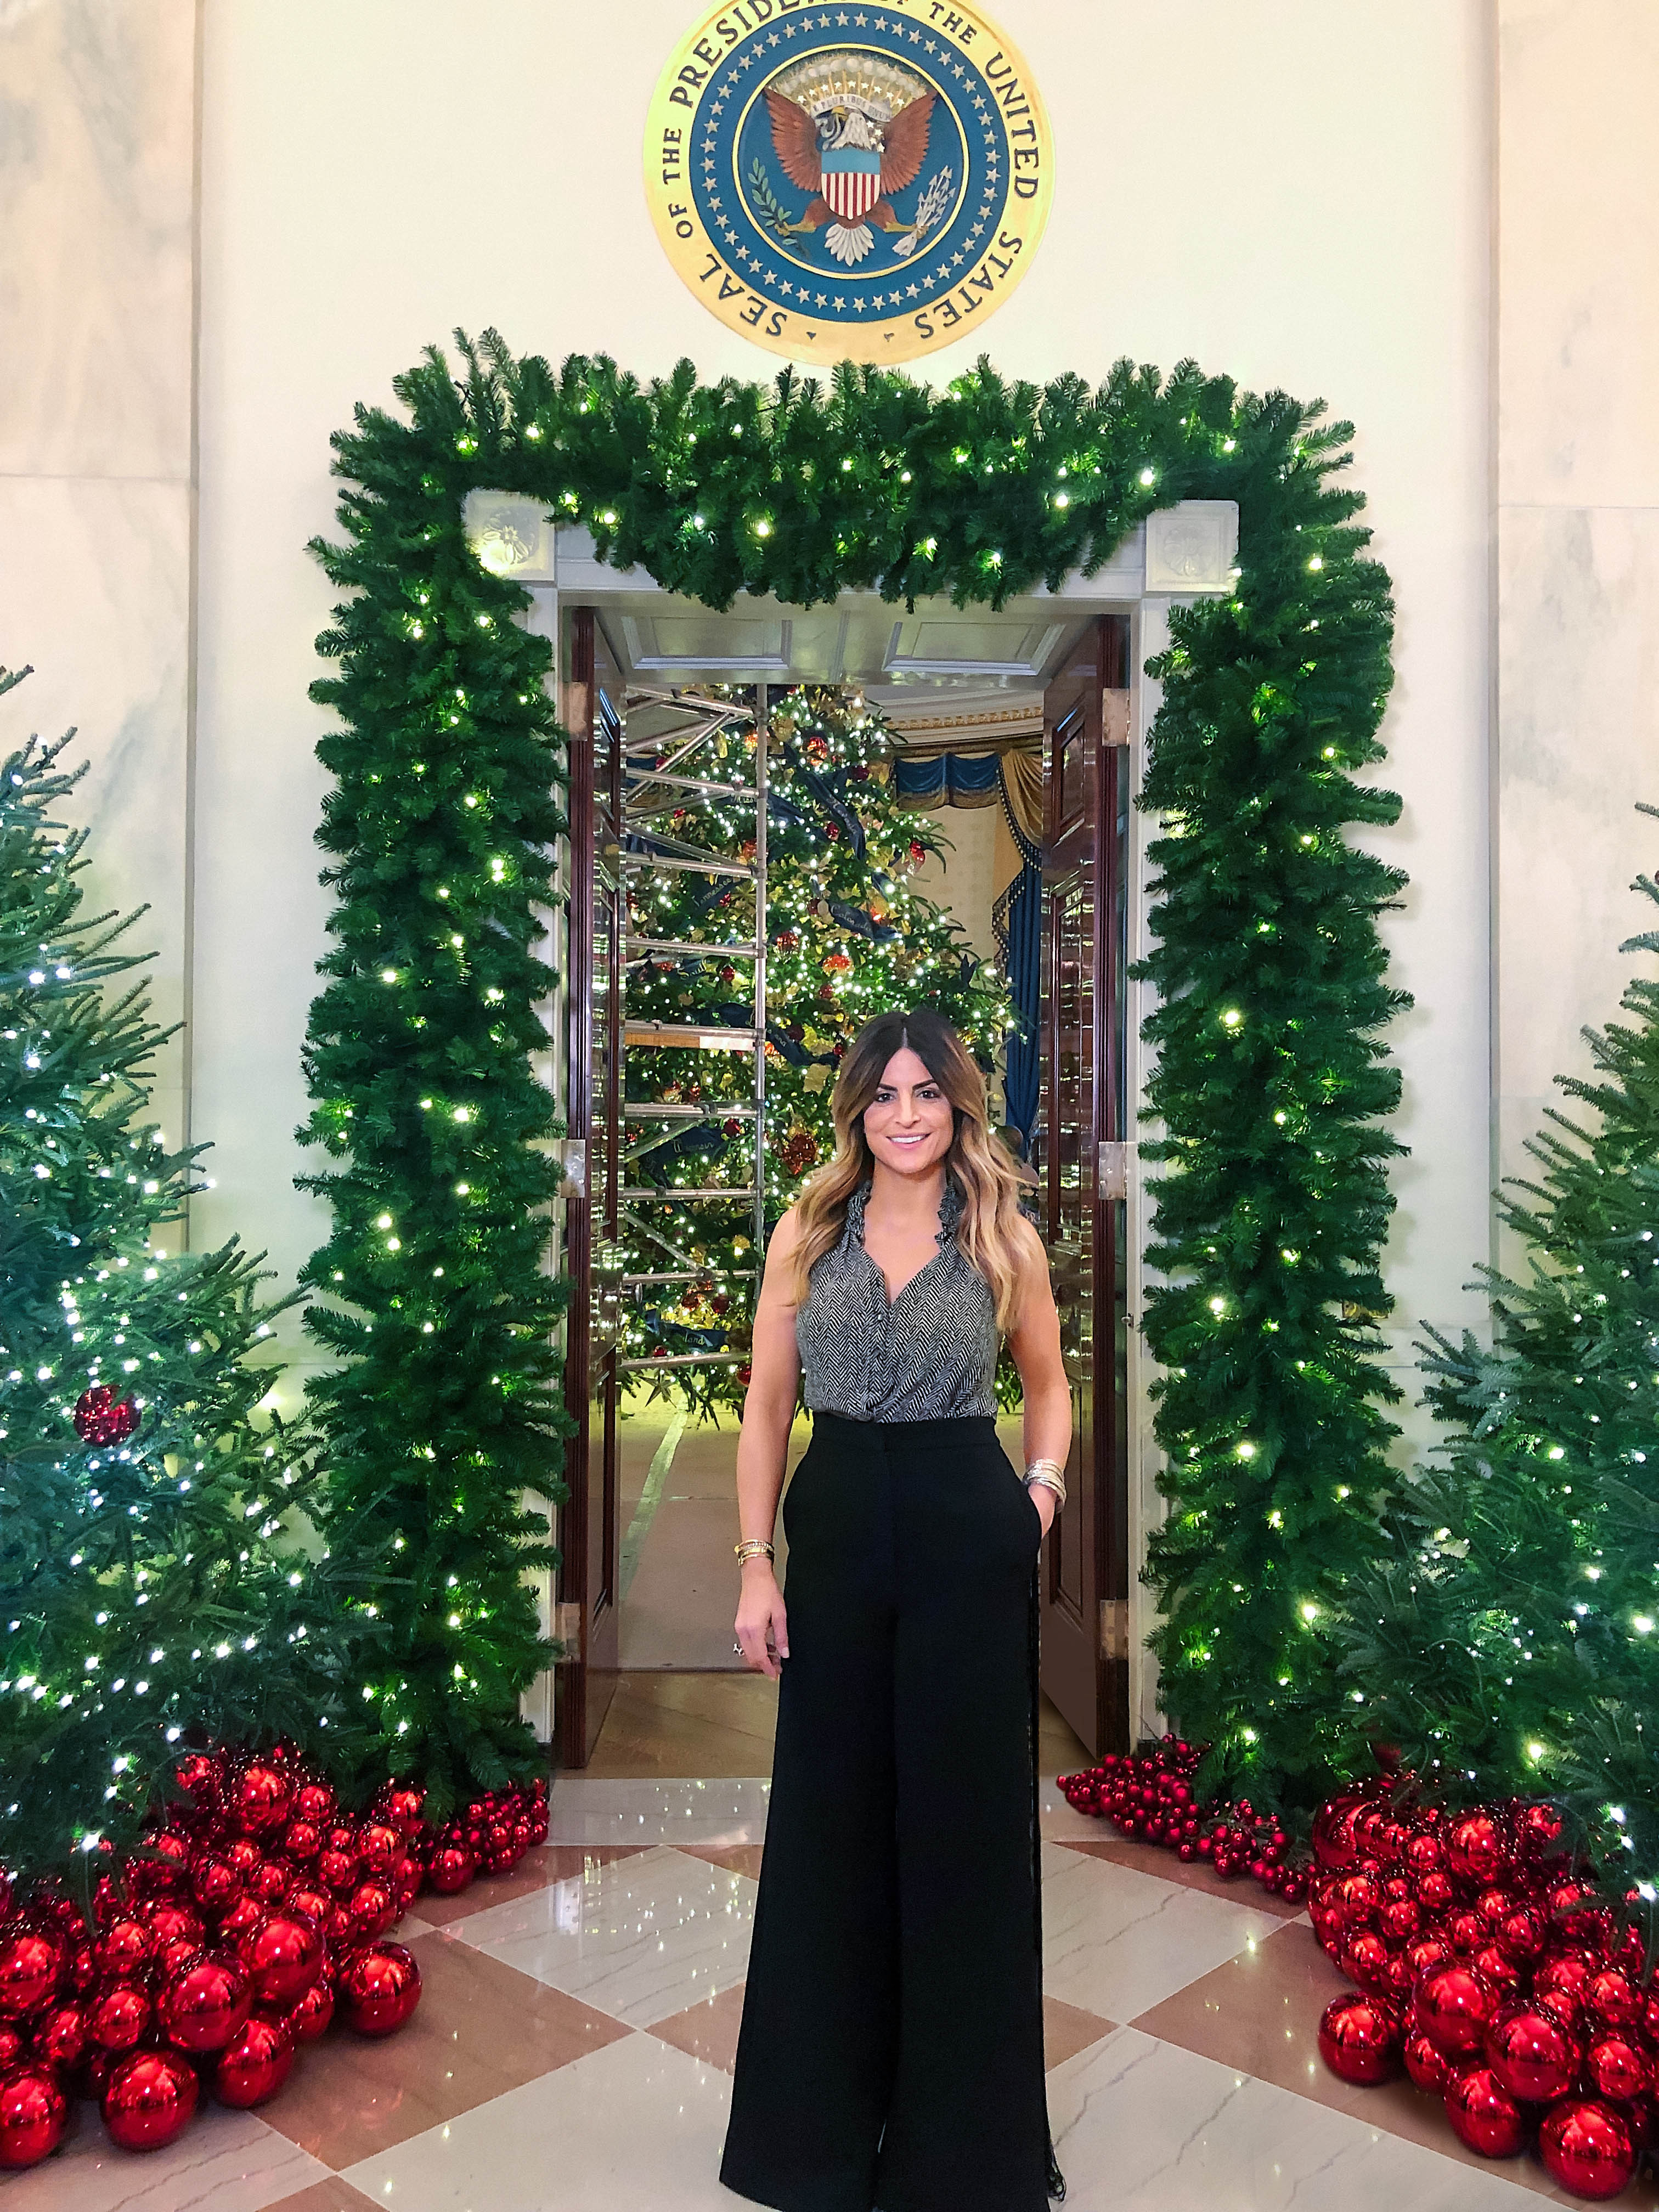 HGTV to Premiere ‘White House Christmas 2018’ on Sunday, Dec. 9, at 6 p